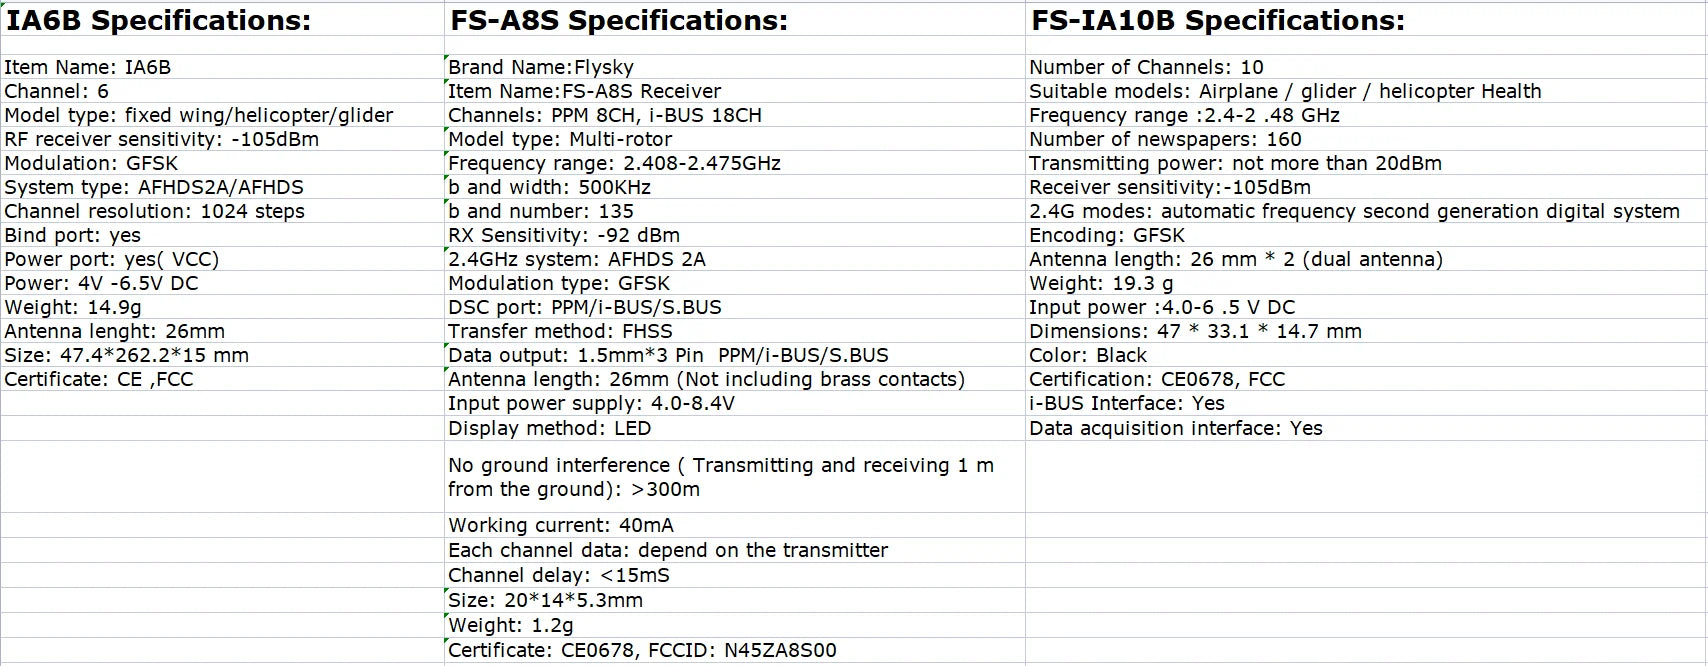 FS-A8S Receiver Suitable models: Airplane glider helicopter Health